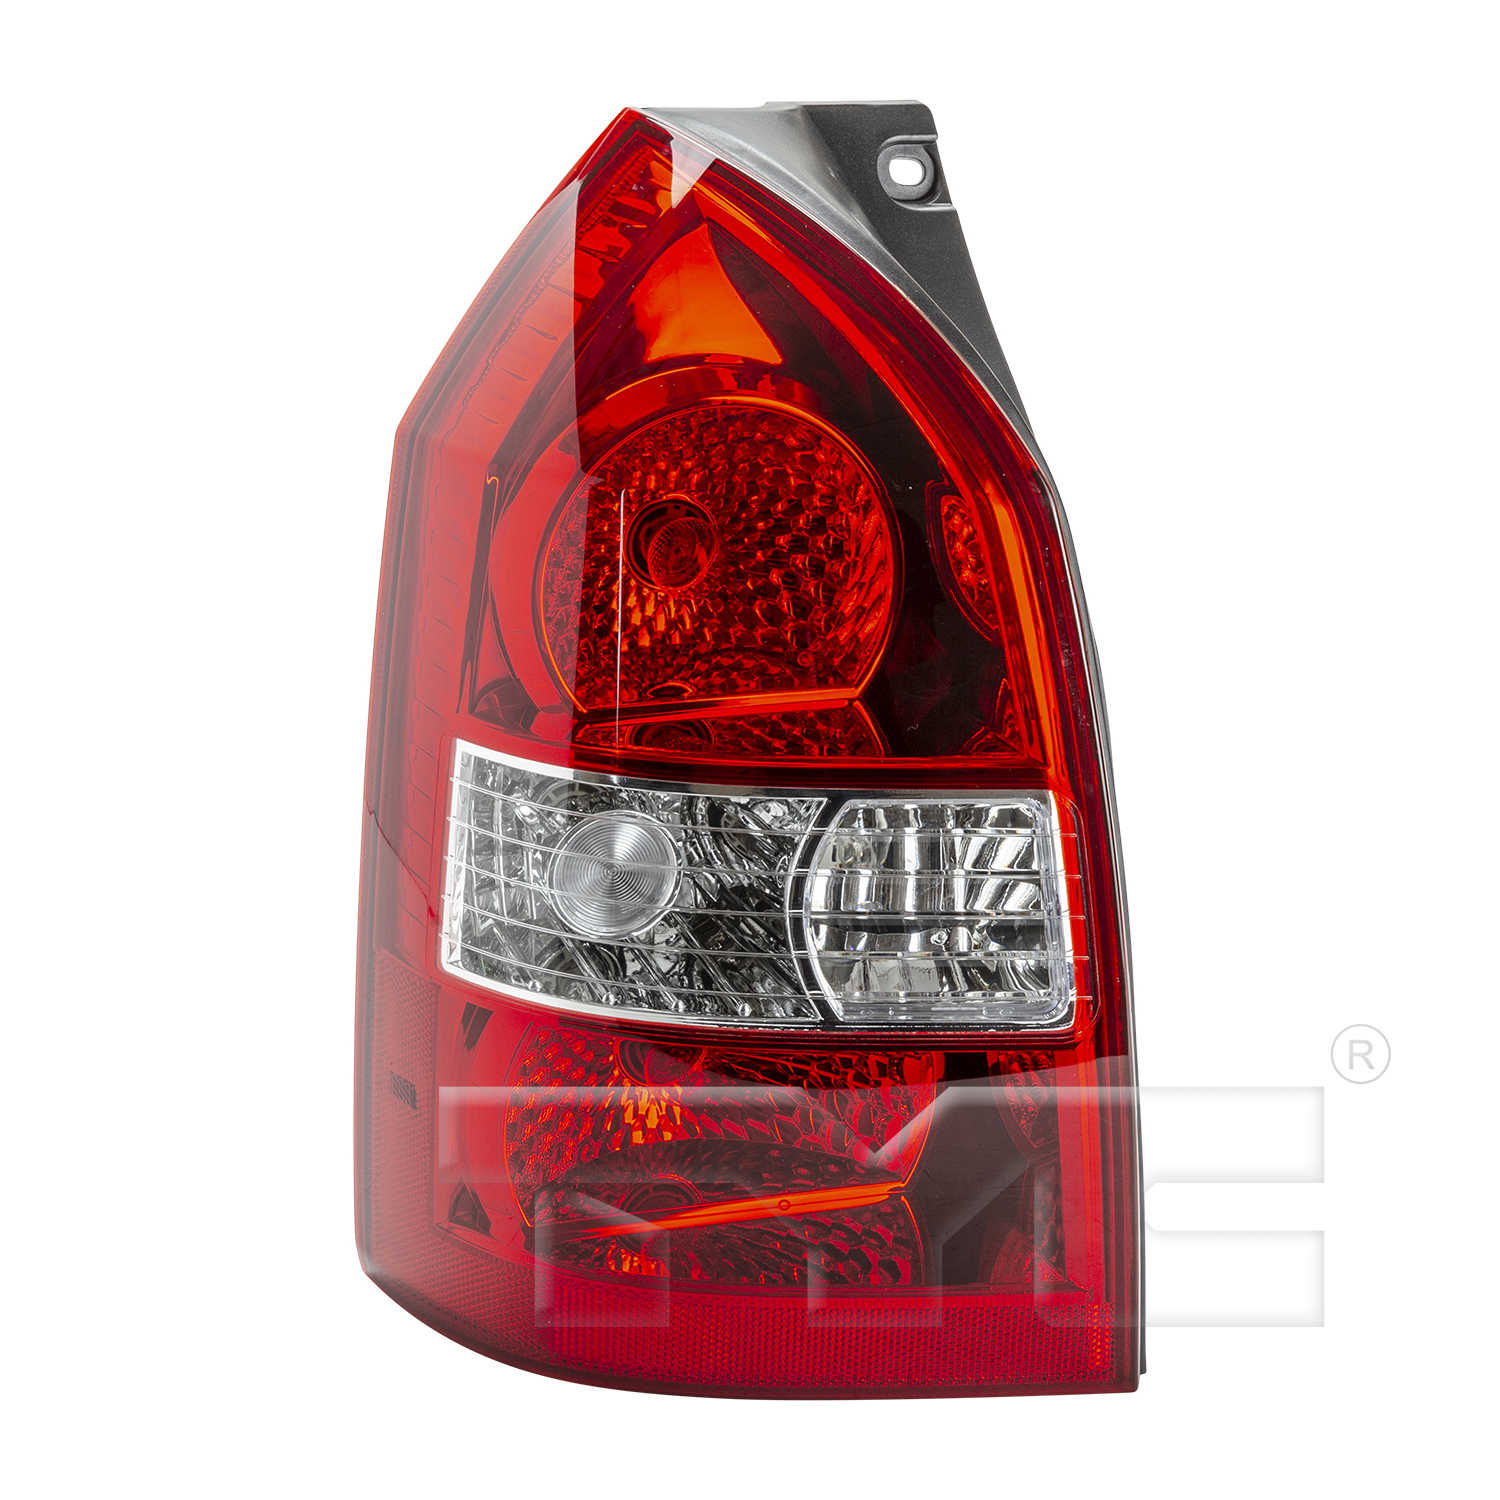 Aftermarket TAILLIGHTS for HYUNDAI - TUCSON, TUCSON,05-09,LT Taillamp assy